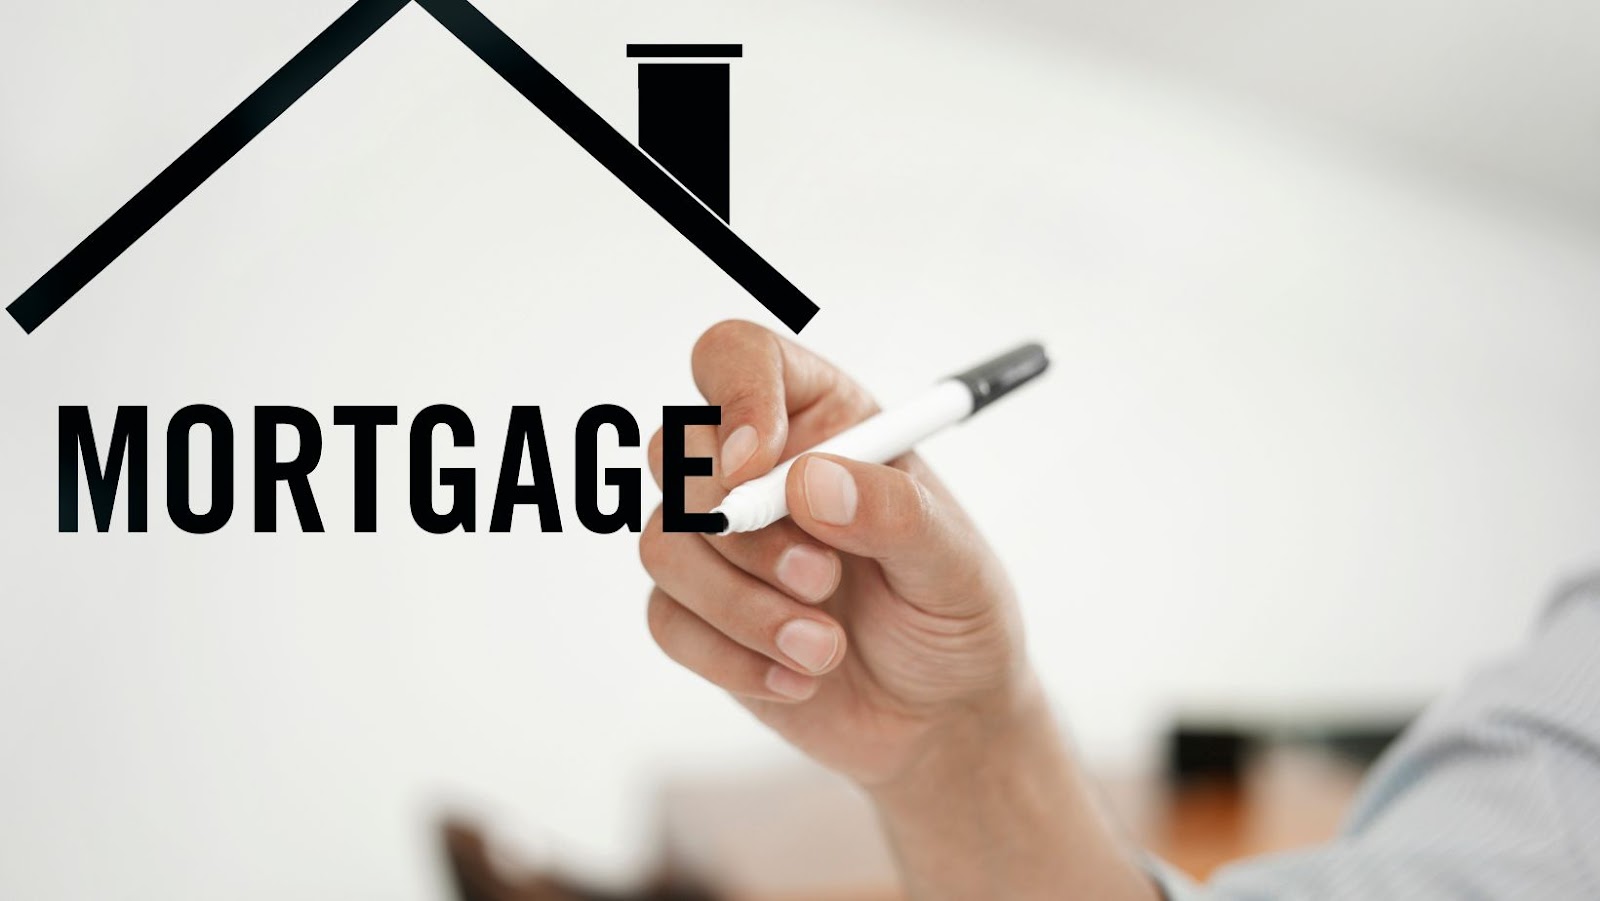 The Essentials For Completing a Mortgage Loan Application